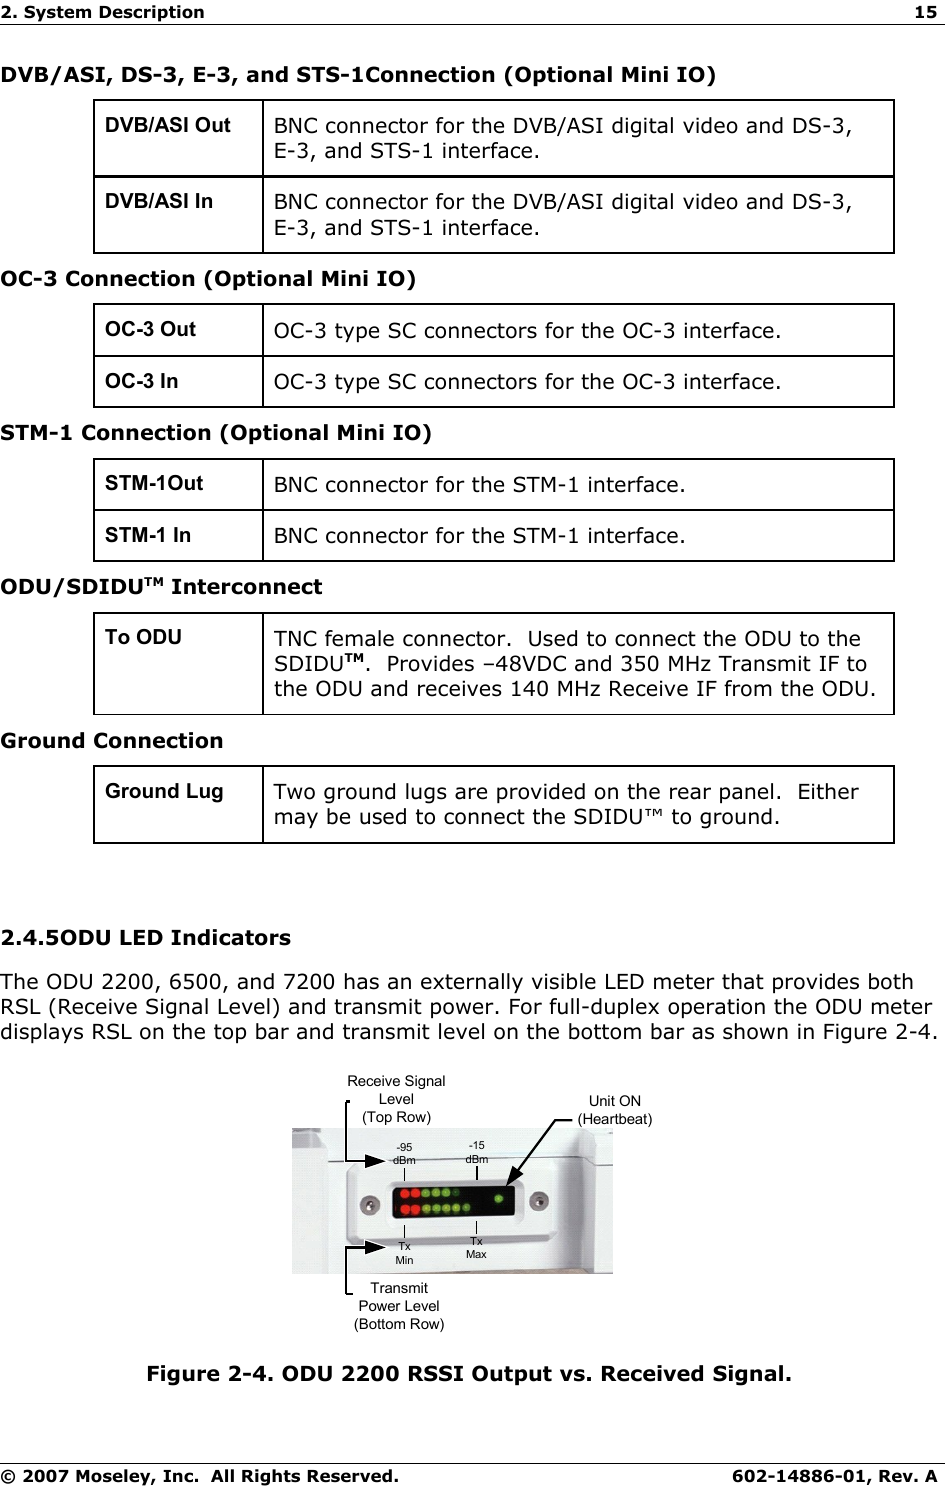 2. System Description 15DVB/ASI, DS-3, E-3, and STS-1Connection (Optional Mini IO)DVB/ASI Out BNC connector for the DVB/ASI digital video and DS-3, E-3, and STS-1 interface.DVB/ASI In BNC connector for the DVB/ASI digital video and DS-3, E-3, and STS-1 interface.OC-3 Connection (Optional Mini IO)OC-3 Out OC-3 type SC connectors for the OC-3 interface.OC-3 In OC-3 type SC connectors for the OC-3 interface.STM-1 Connection (Optional Mini IO)STM-1Out BNC connector for the STM-1 interface.STM-1 In BNC connector for the STM-1 interface.ODU/SDIDUTM InterconnectTo ODU TNC female connector.  Used to connect the ODU to the SDIDUTM.  Provides –48VDC and 350 MHz Transmit IF to the ODU and receives 140 MHz Receive IF from the ODU.Ground ConnectionGround Lug Two ground lugs are provided on the rear panel.  Either may be used to connect the SDIDU™ to ground.2.4.5ODU LED IndicatorsThe ODU 2200, 6500, and 7200 has an externally visible LED meter that provides both RSL (Receive Signal Level) and transmit power. For full-duplex operation the ODU meter displays RSL on the top bar and transmit level on the bottom bar as shown in Figure 2-4. Unit ON (Heartbeat)-95dBm-15dBmTx MinTx MaxTransmit Power Level (Bottom Row)Receive Signal Level (Top Row)Figure 2-4. ODU 2200 RSSI Output vs. Received Signal. © 2007 Moseley, Inc.  All Rights Reserved. 602-14886-01, Rev. A